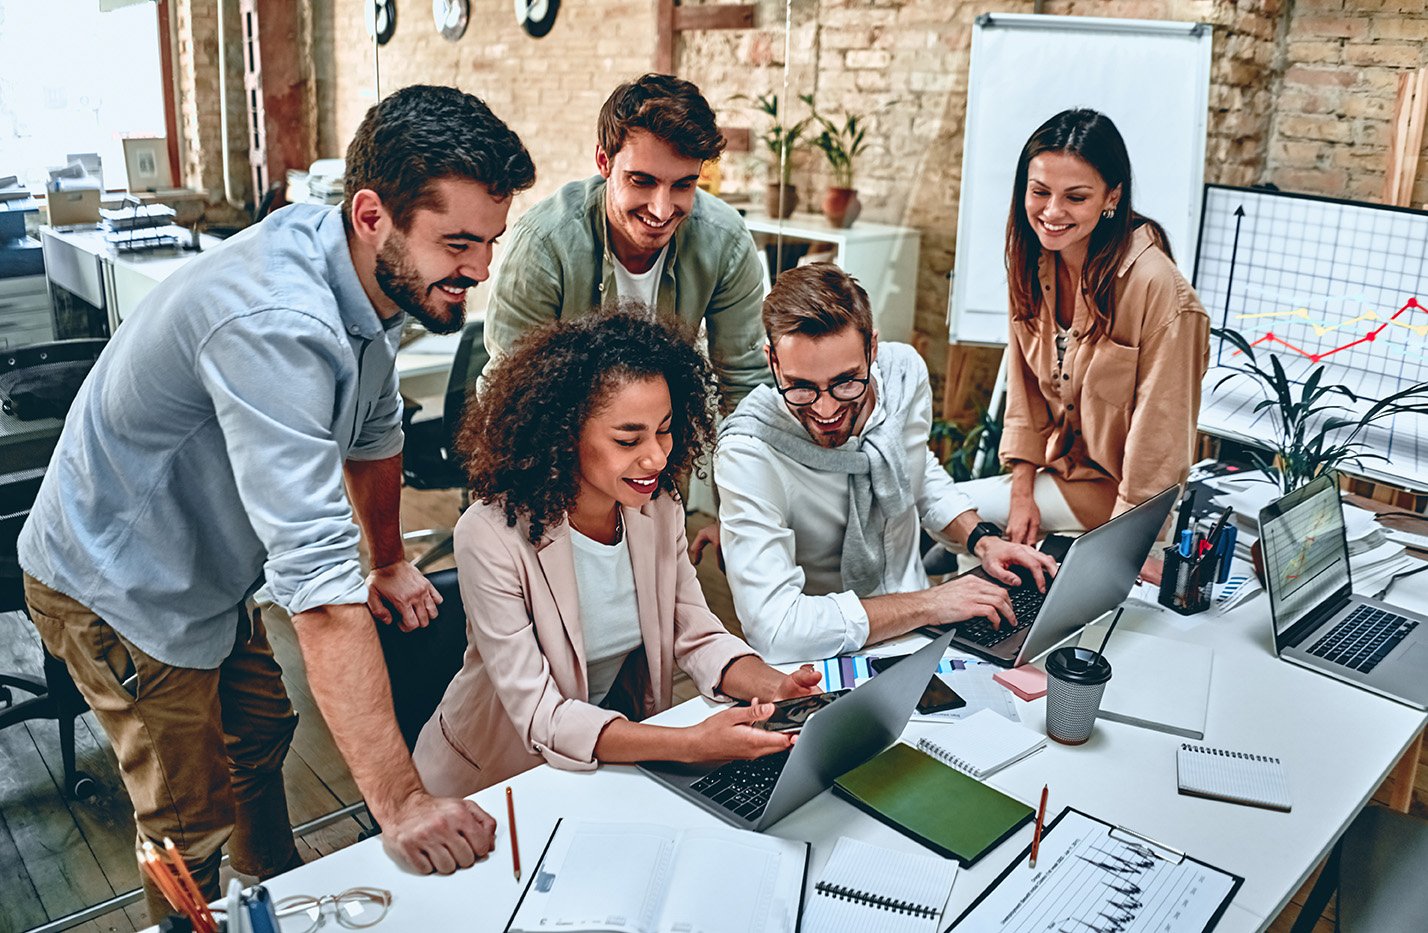 7 Proven Tips for HR Departments to Build a Positive Work Culture